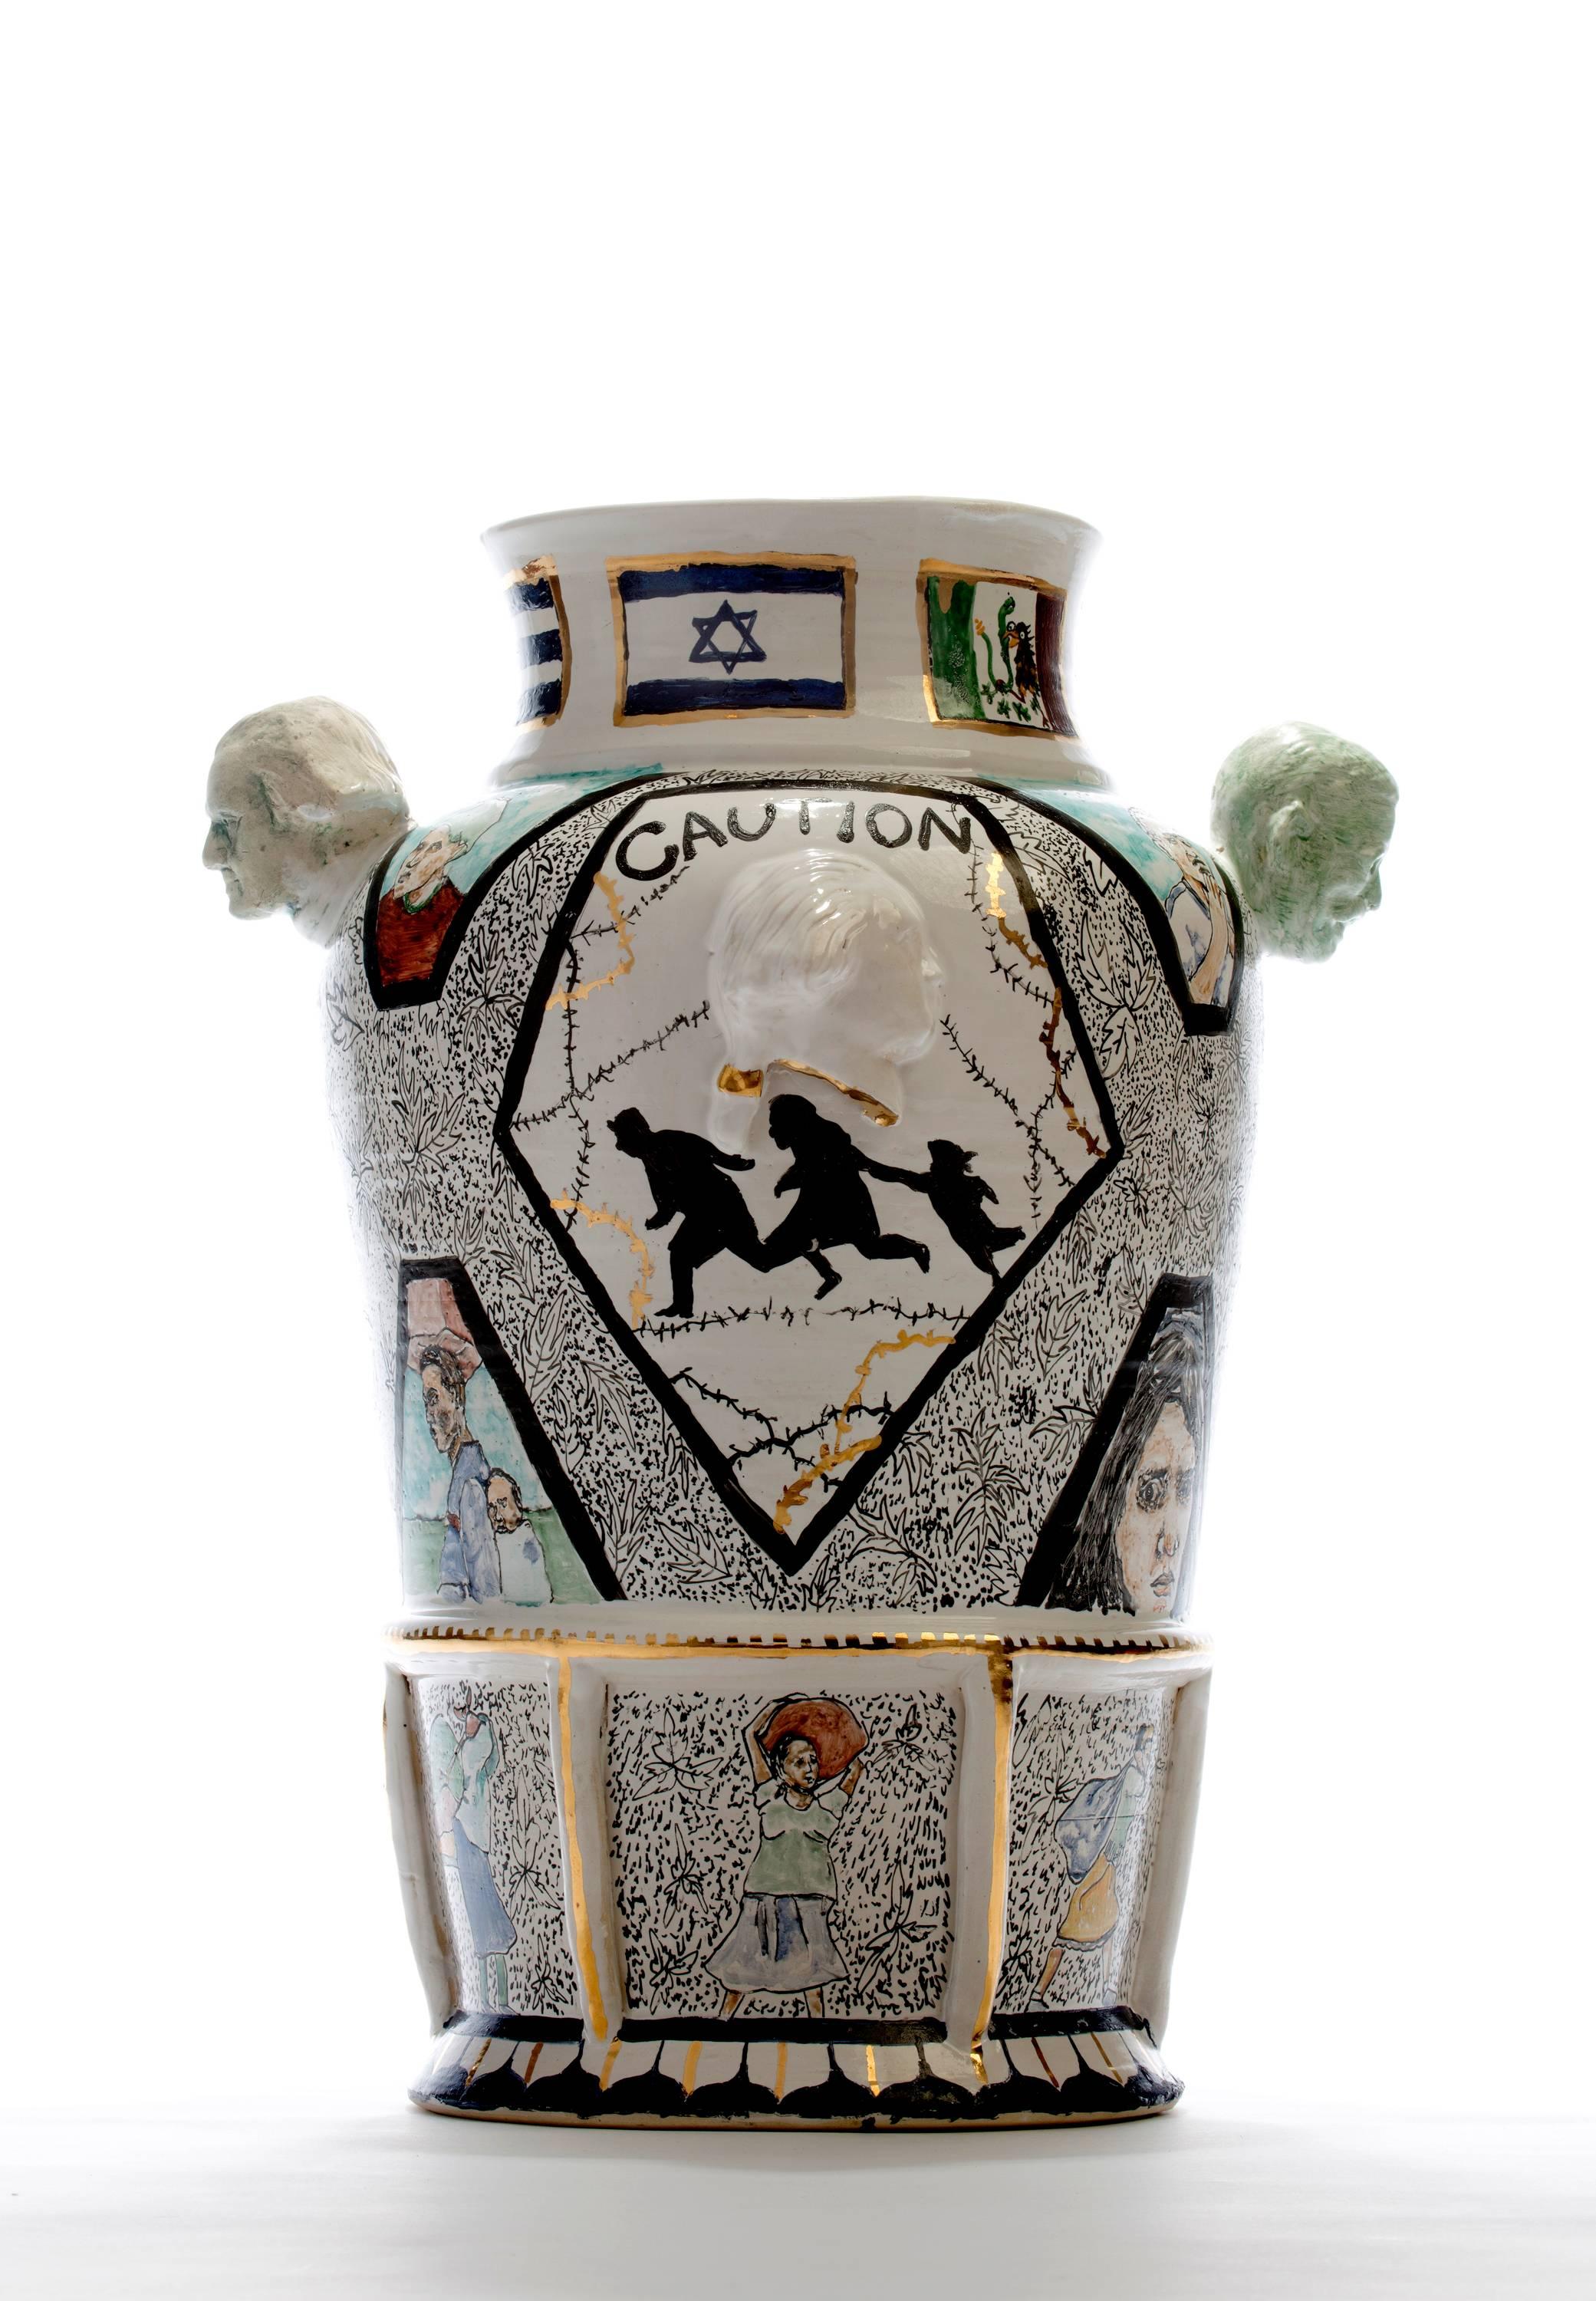 Based on the the original Century vases designed by Karl Muller for the 1876 World's Fair in Philadelphia, Lugo uses the century vase form to depict contemporary issues, such as war, oppression, racial tension and inequality. 

The Original